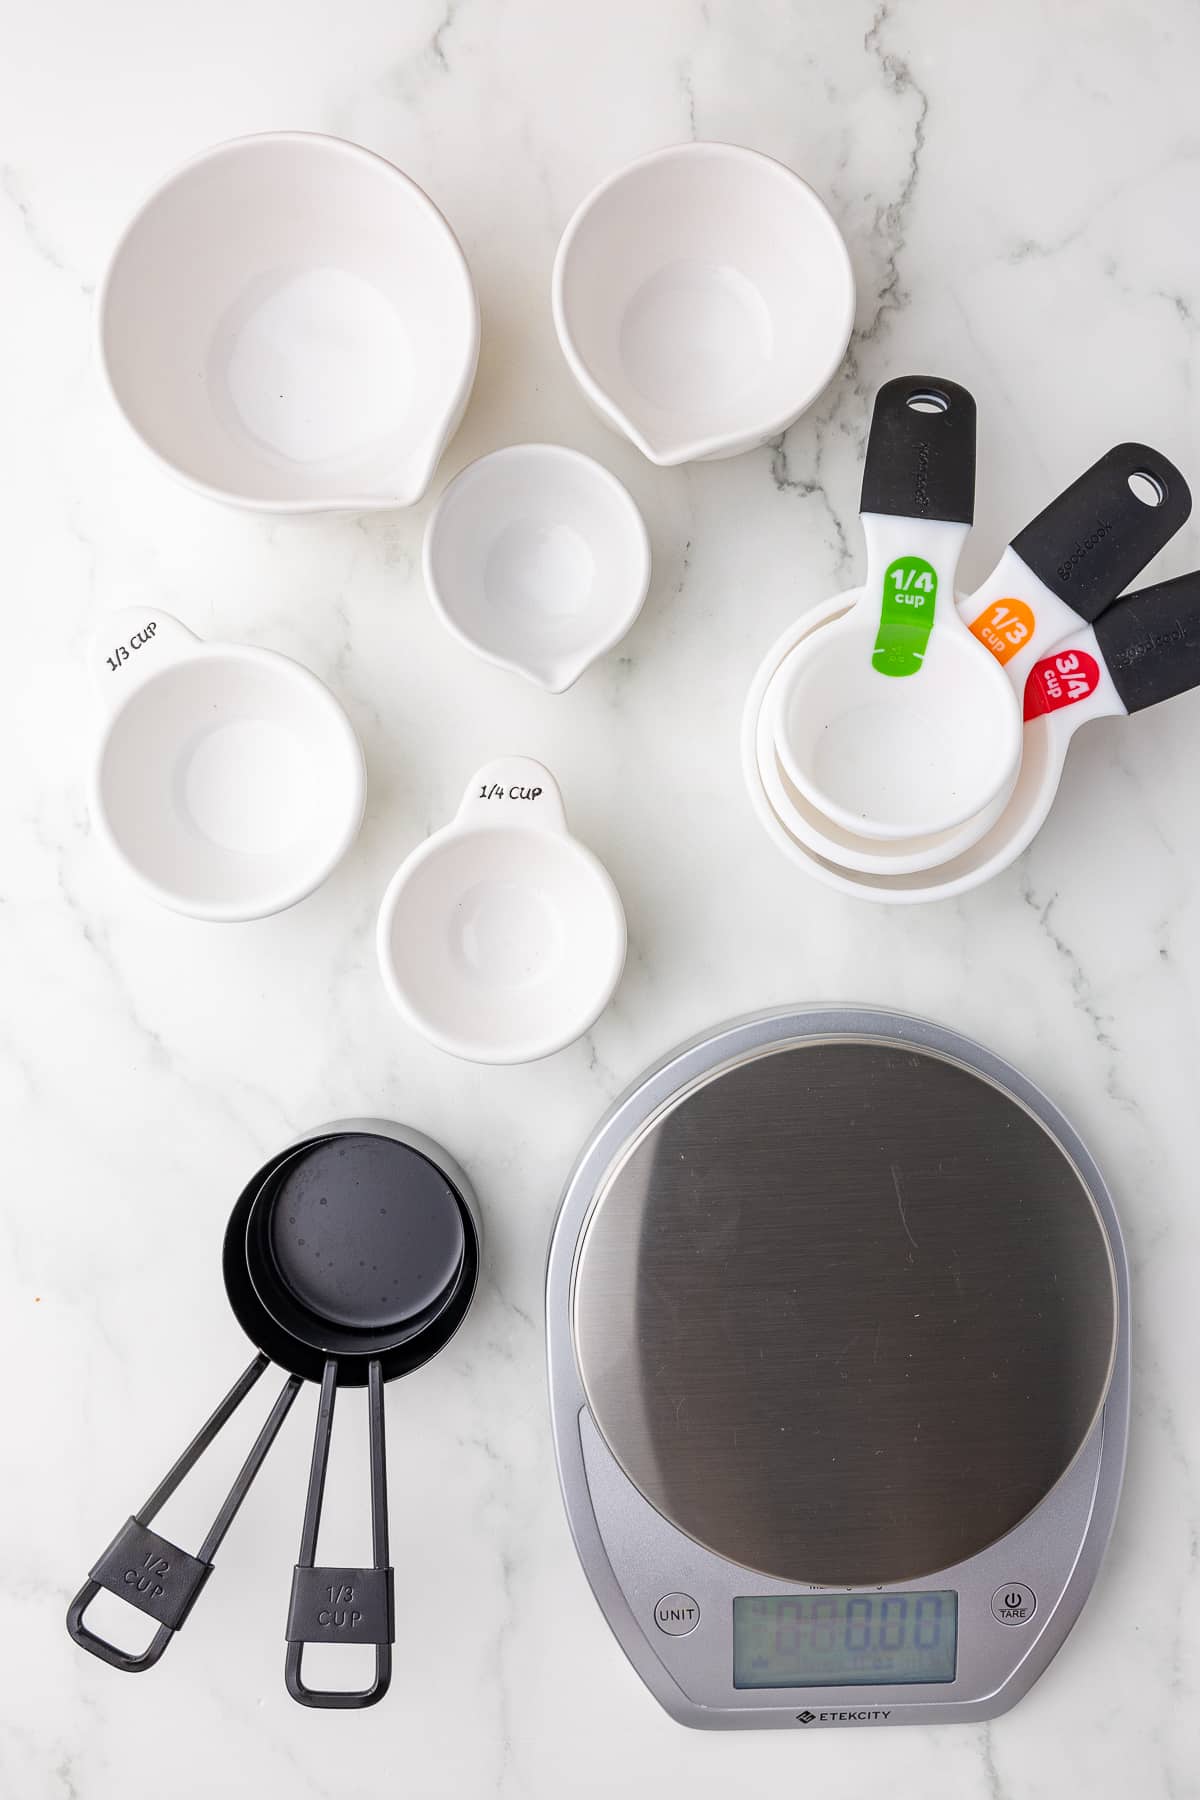 dry measuring cups and a kitchen scale on a white countertop